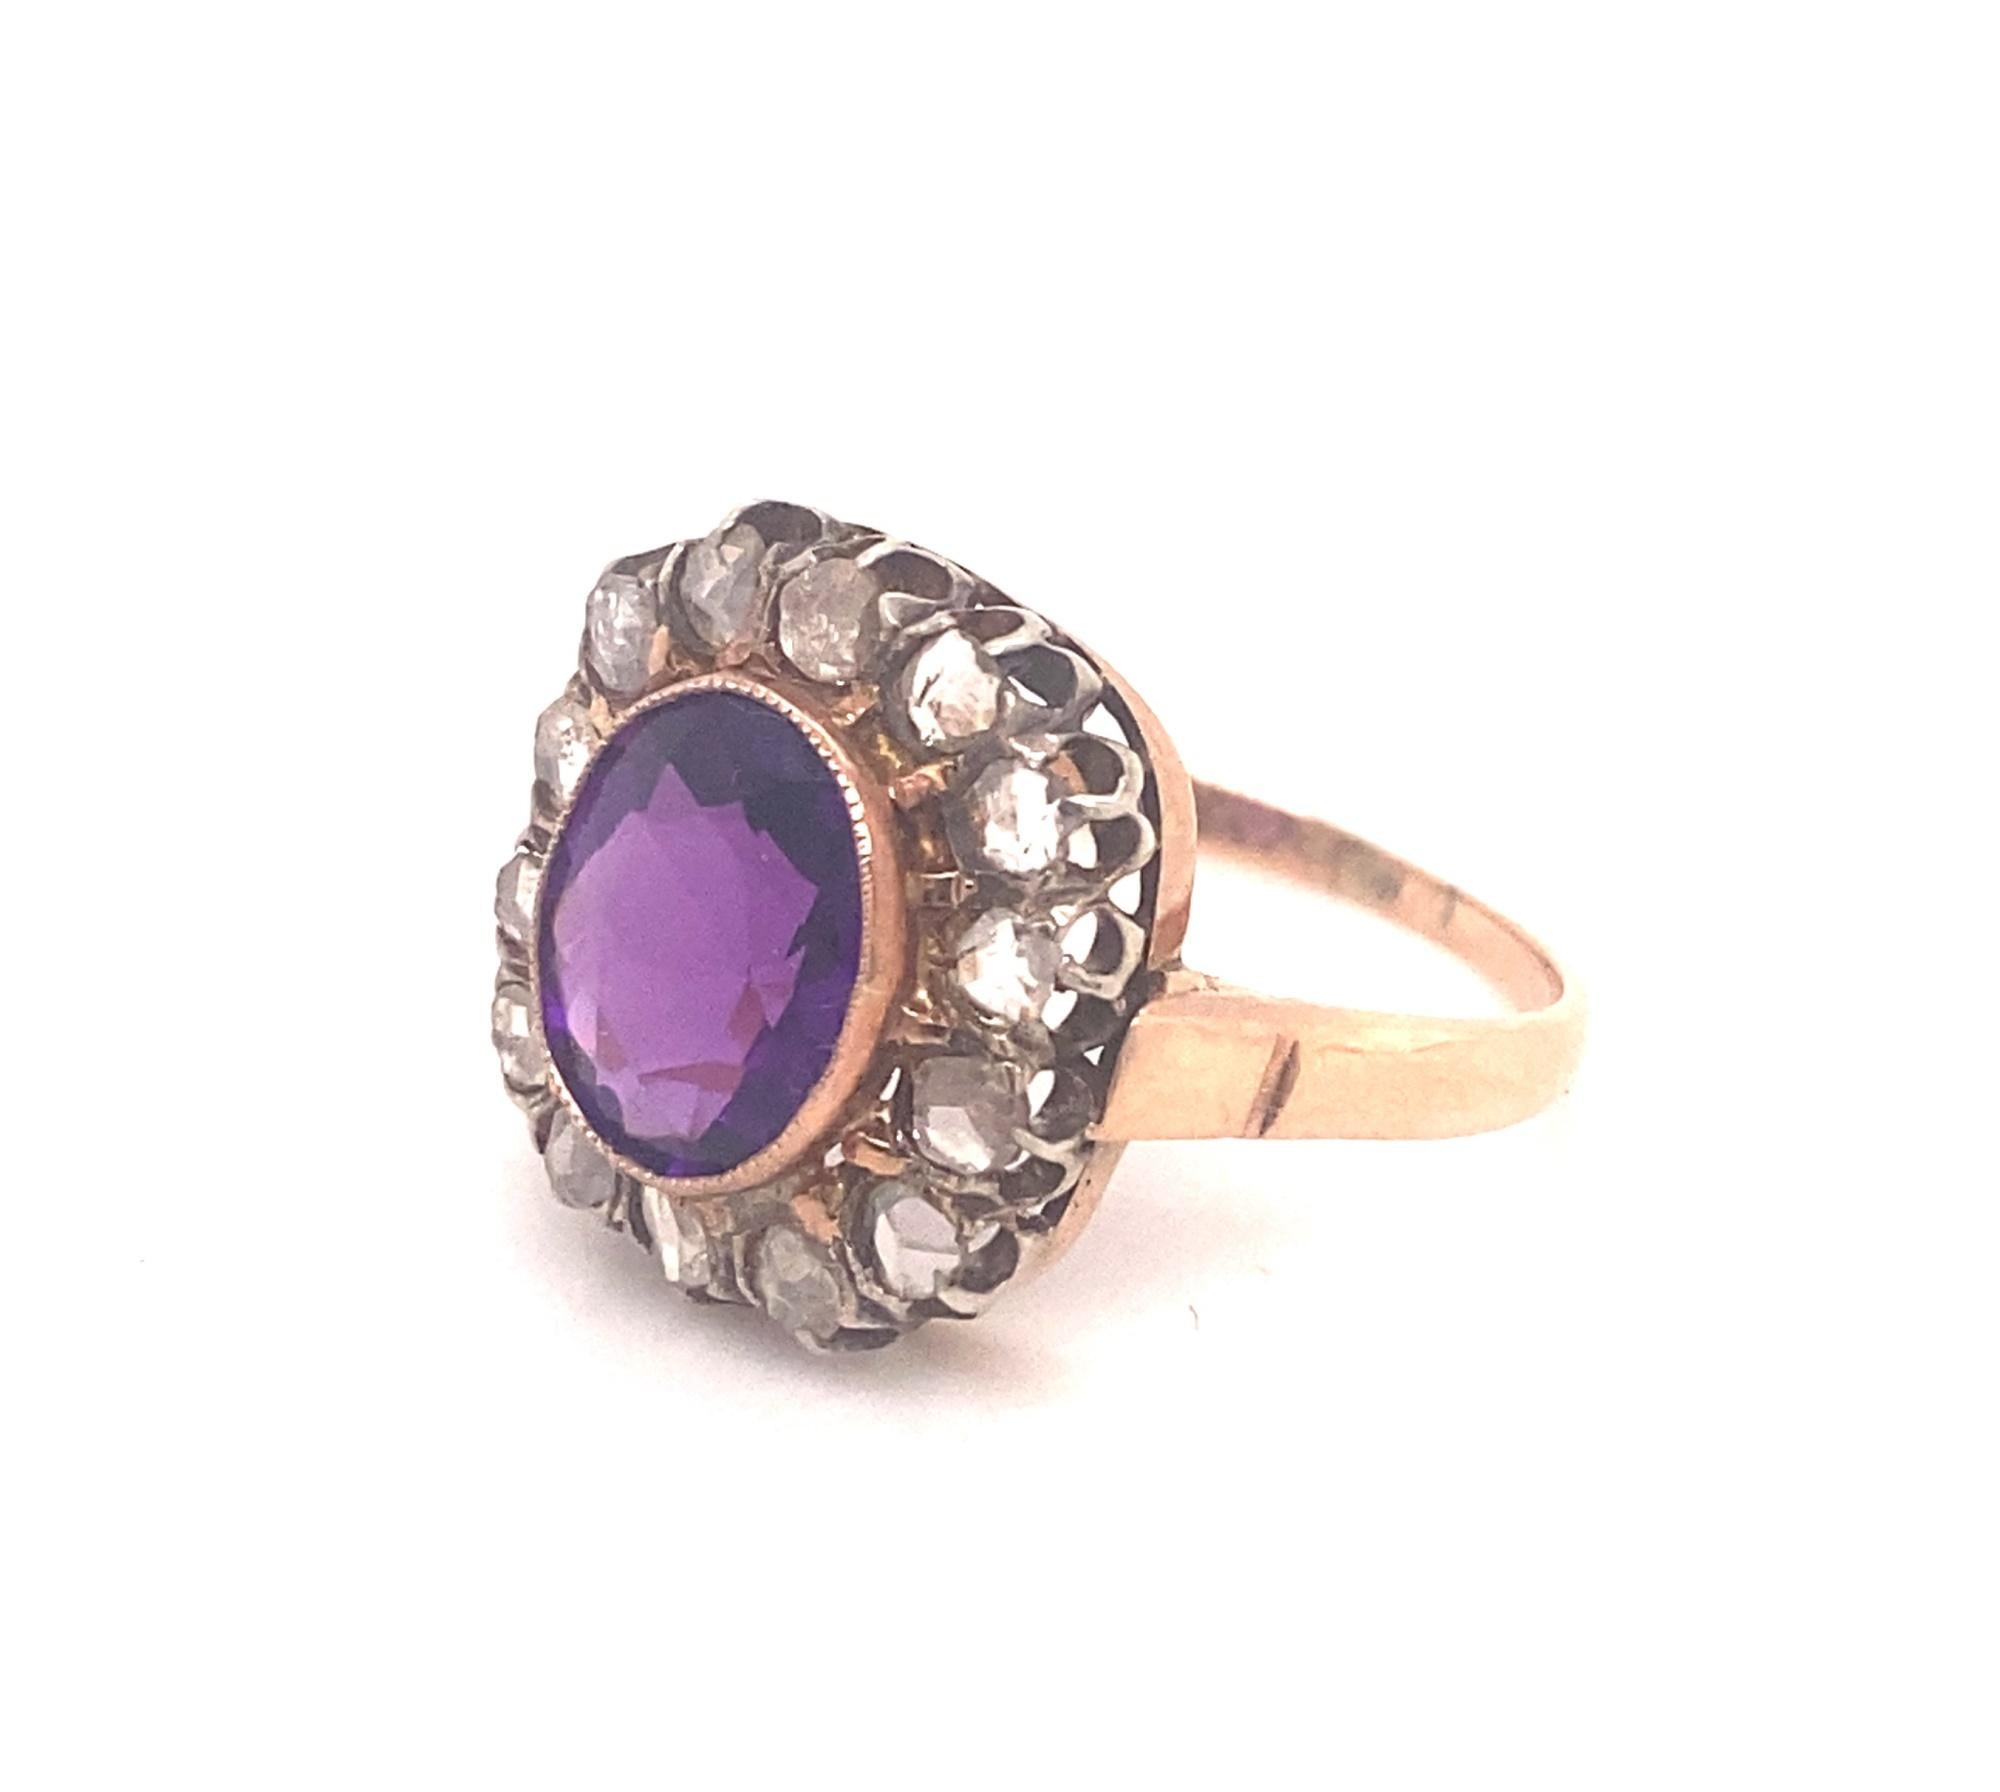 This is a beautiful antique Victorian ring with an oval shaped amethyst and rose cut diamonds. The diamonds are set in silver and the ring is 18K yellow gold.  The amethyst is oval shaped with amazing color and clarity approximately 3.0 carats.